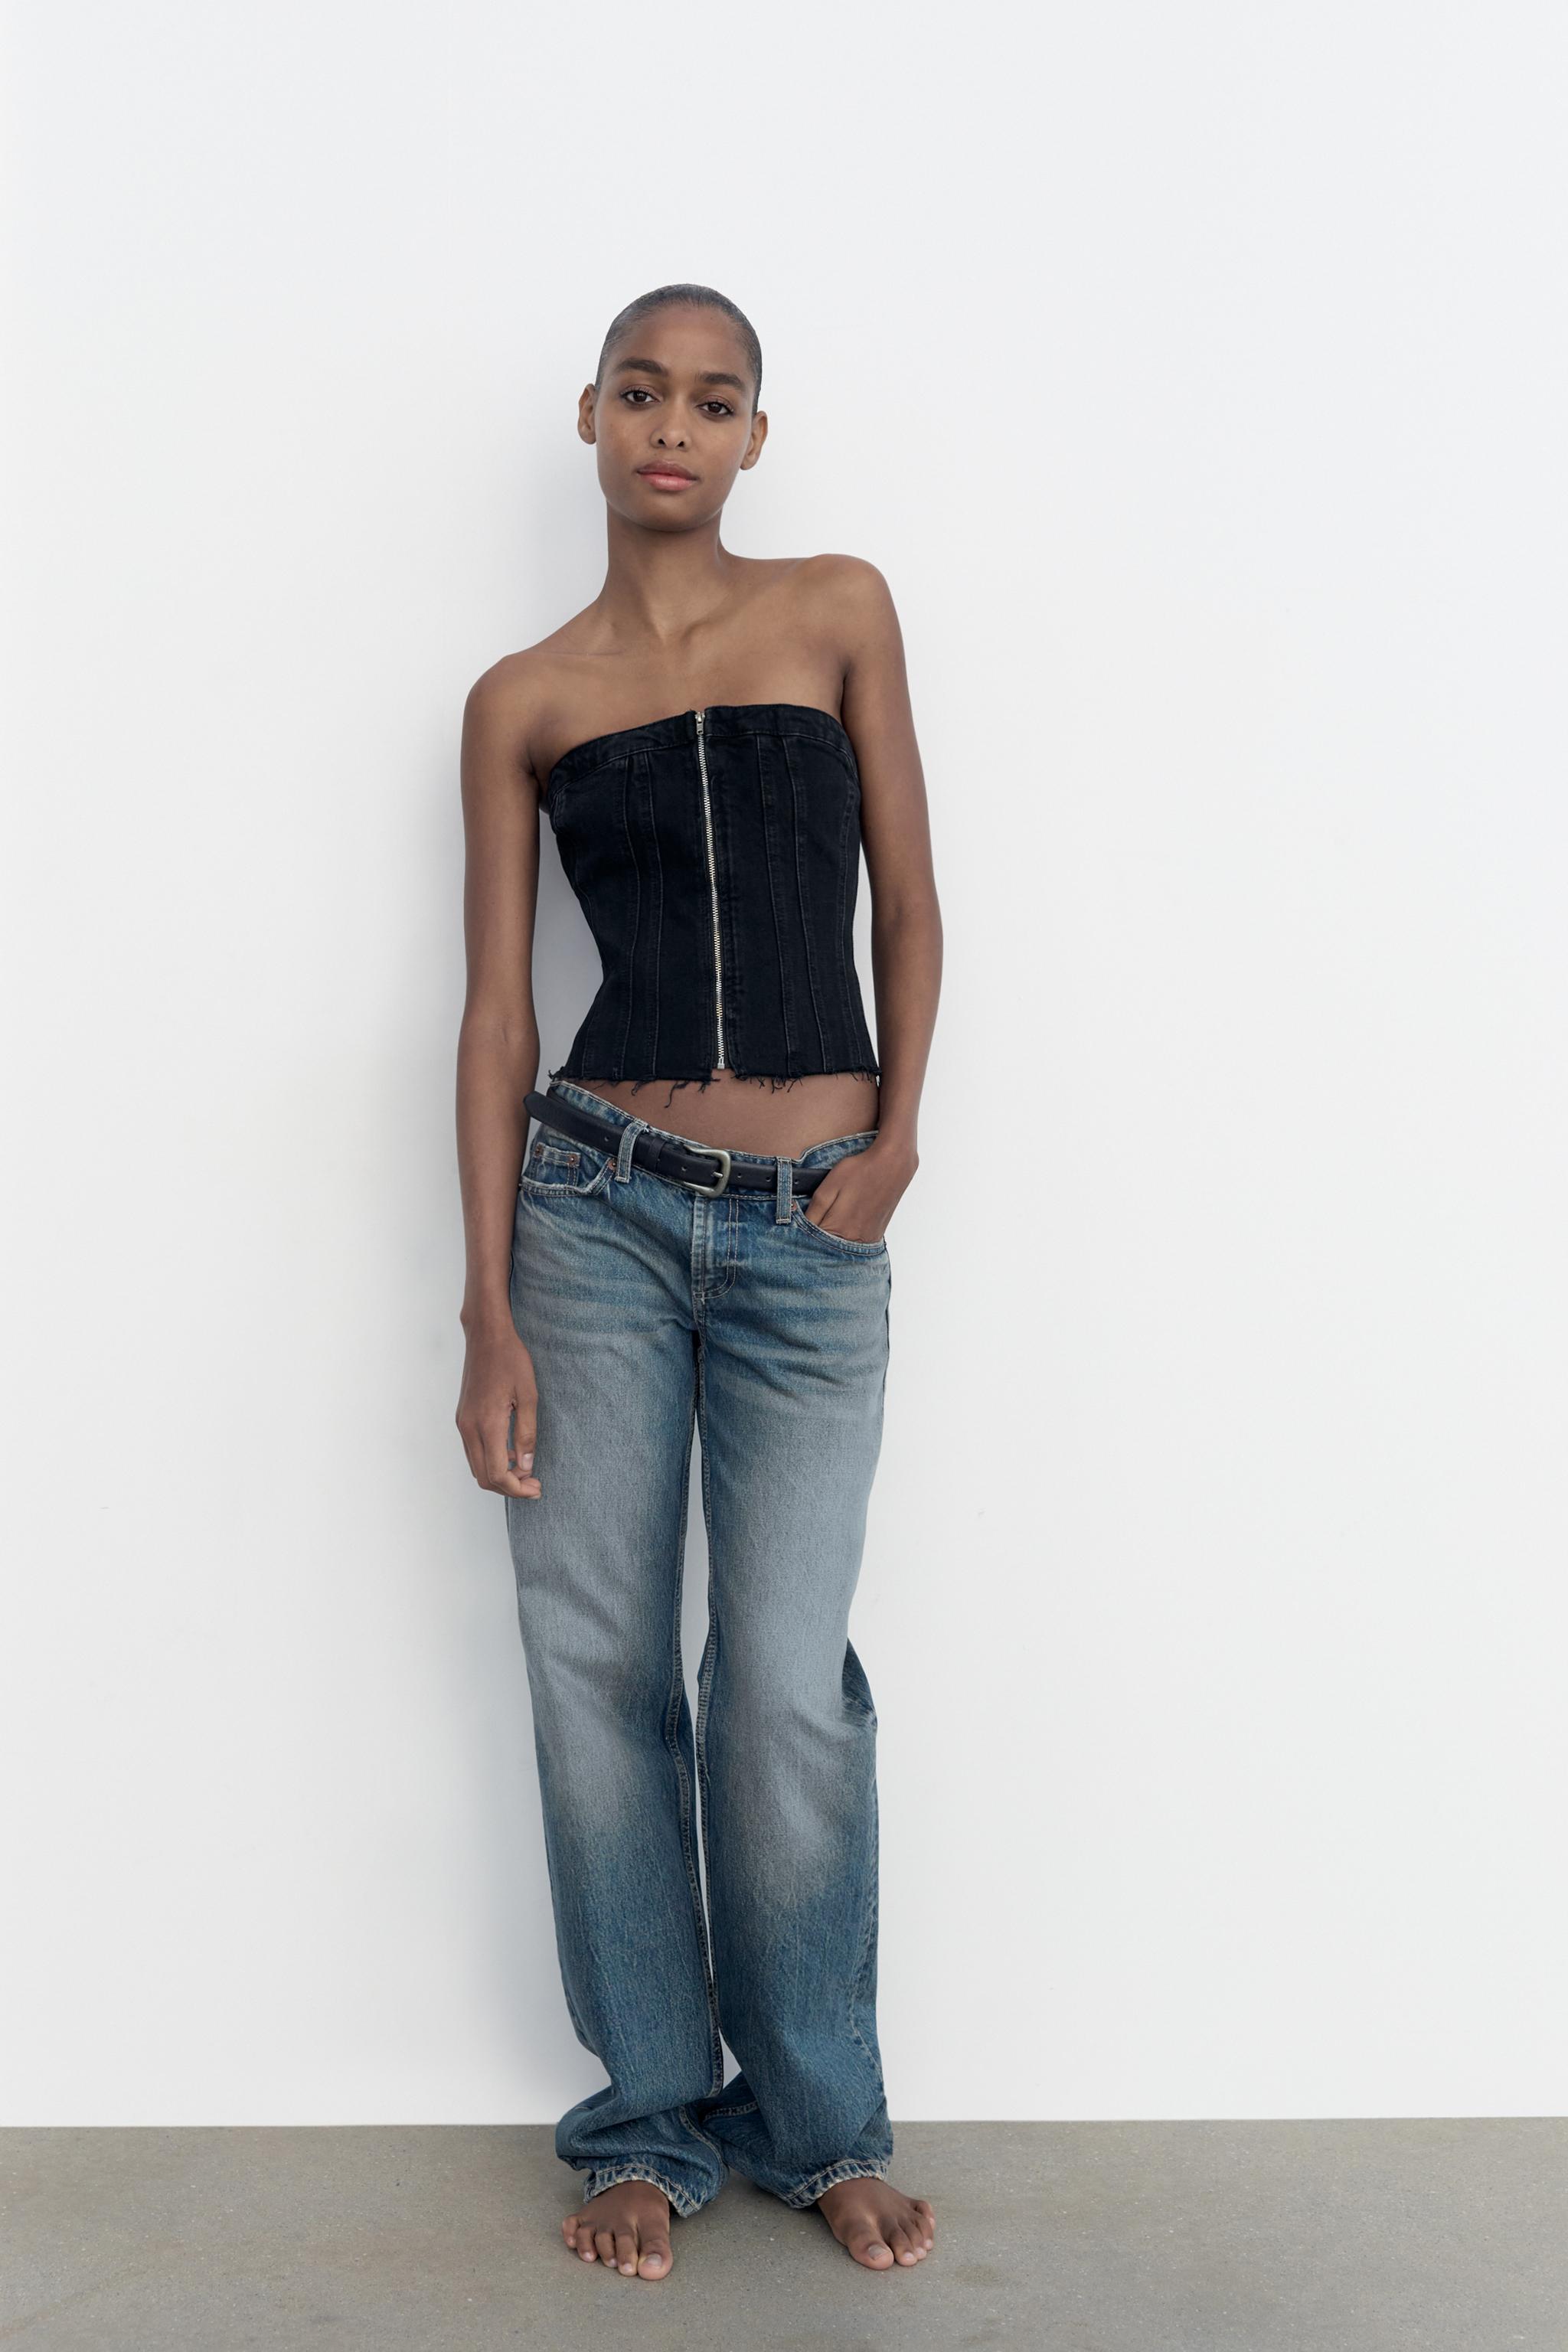 Shop ZARA 2023 SS CORSET STYLE DENIM TOP TRF (8197/110) by MarcaBonito